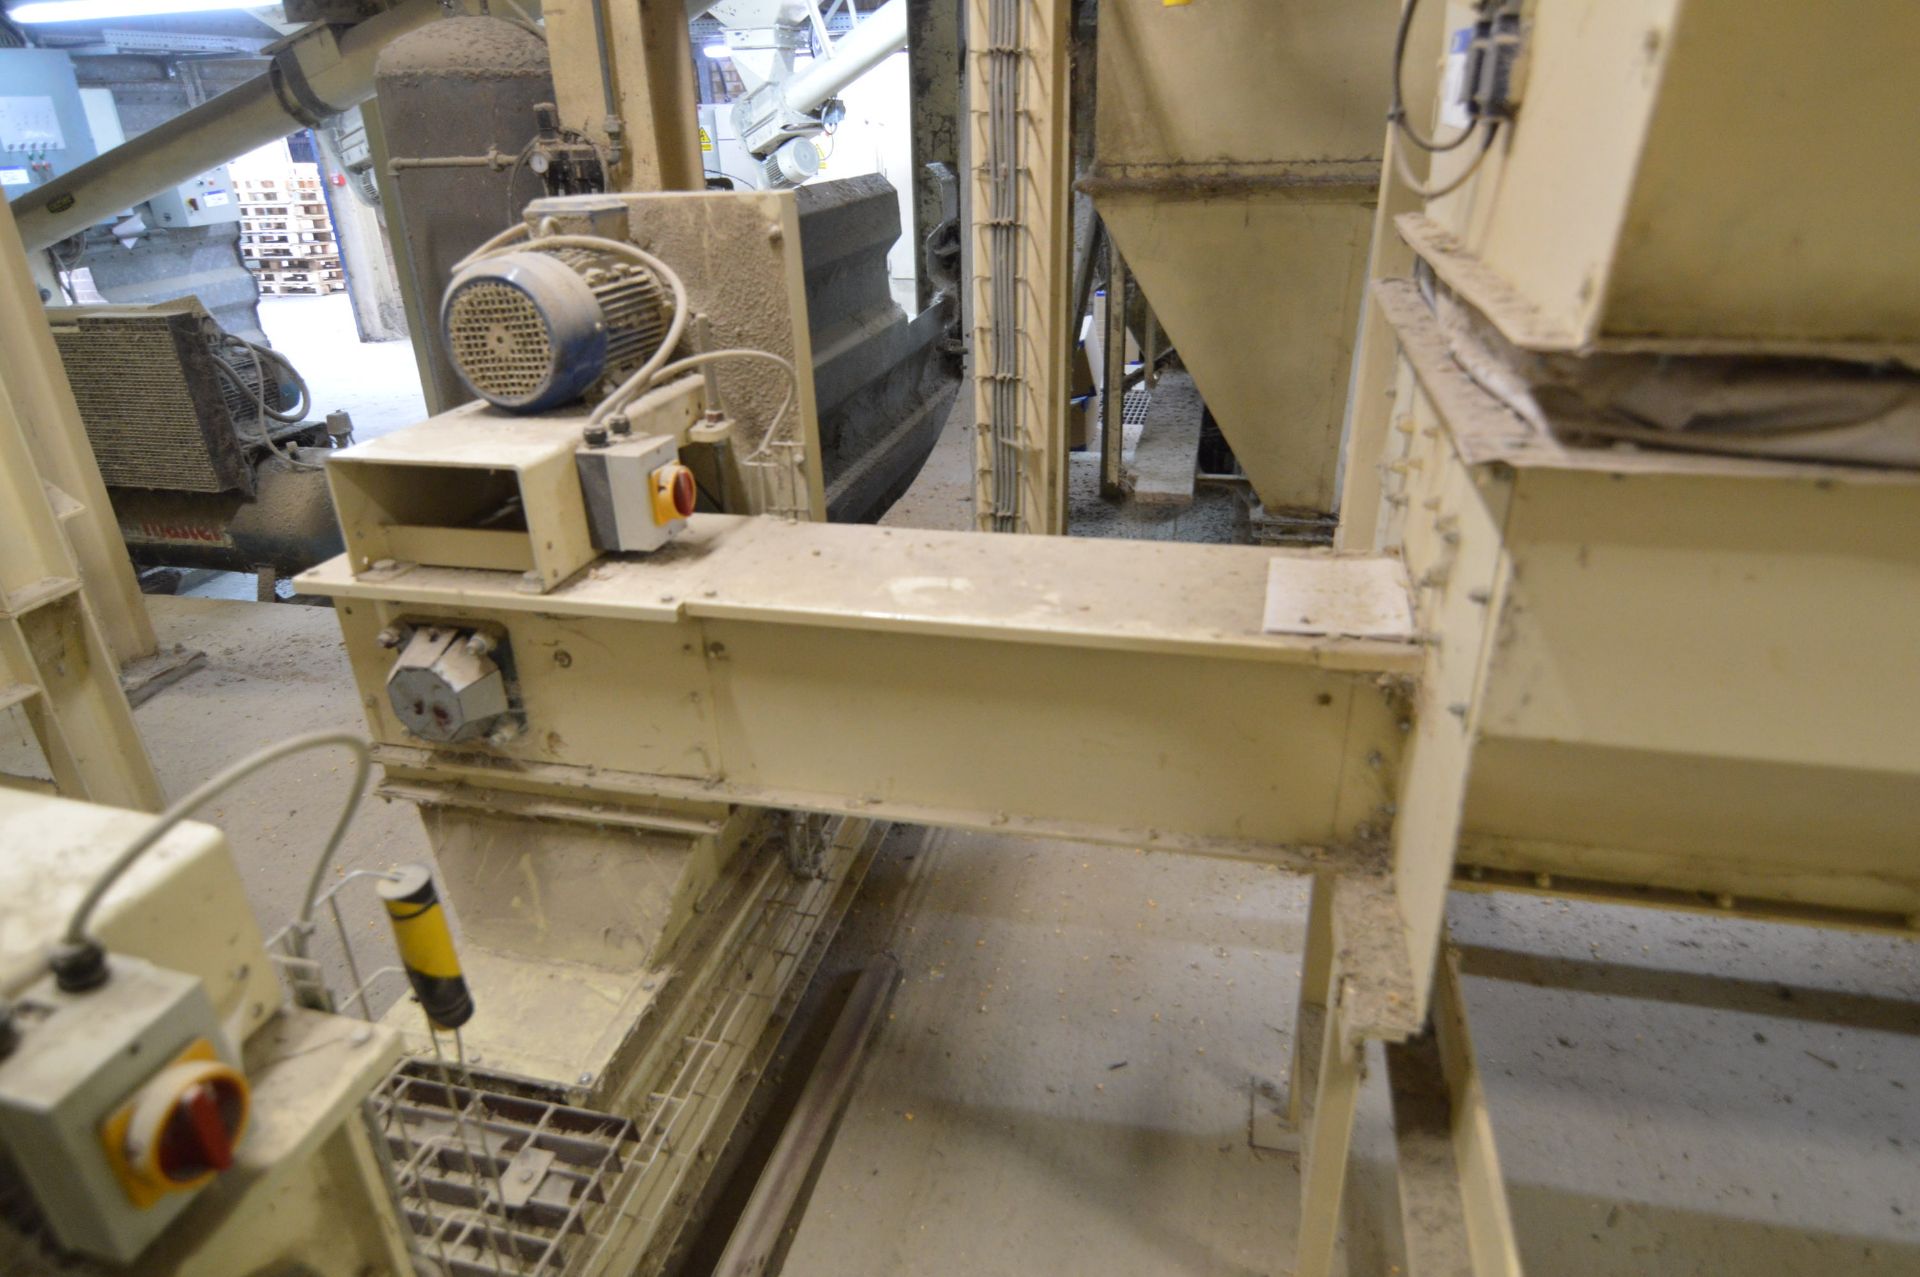 T A SHORE 1000kg & 500kg LOADCELL HOPPER WEIGHERS, installed 2011, with loadcells, steel supports, - Bild 5 aus 5